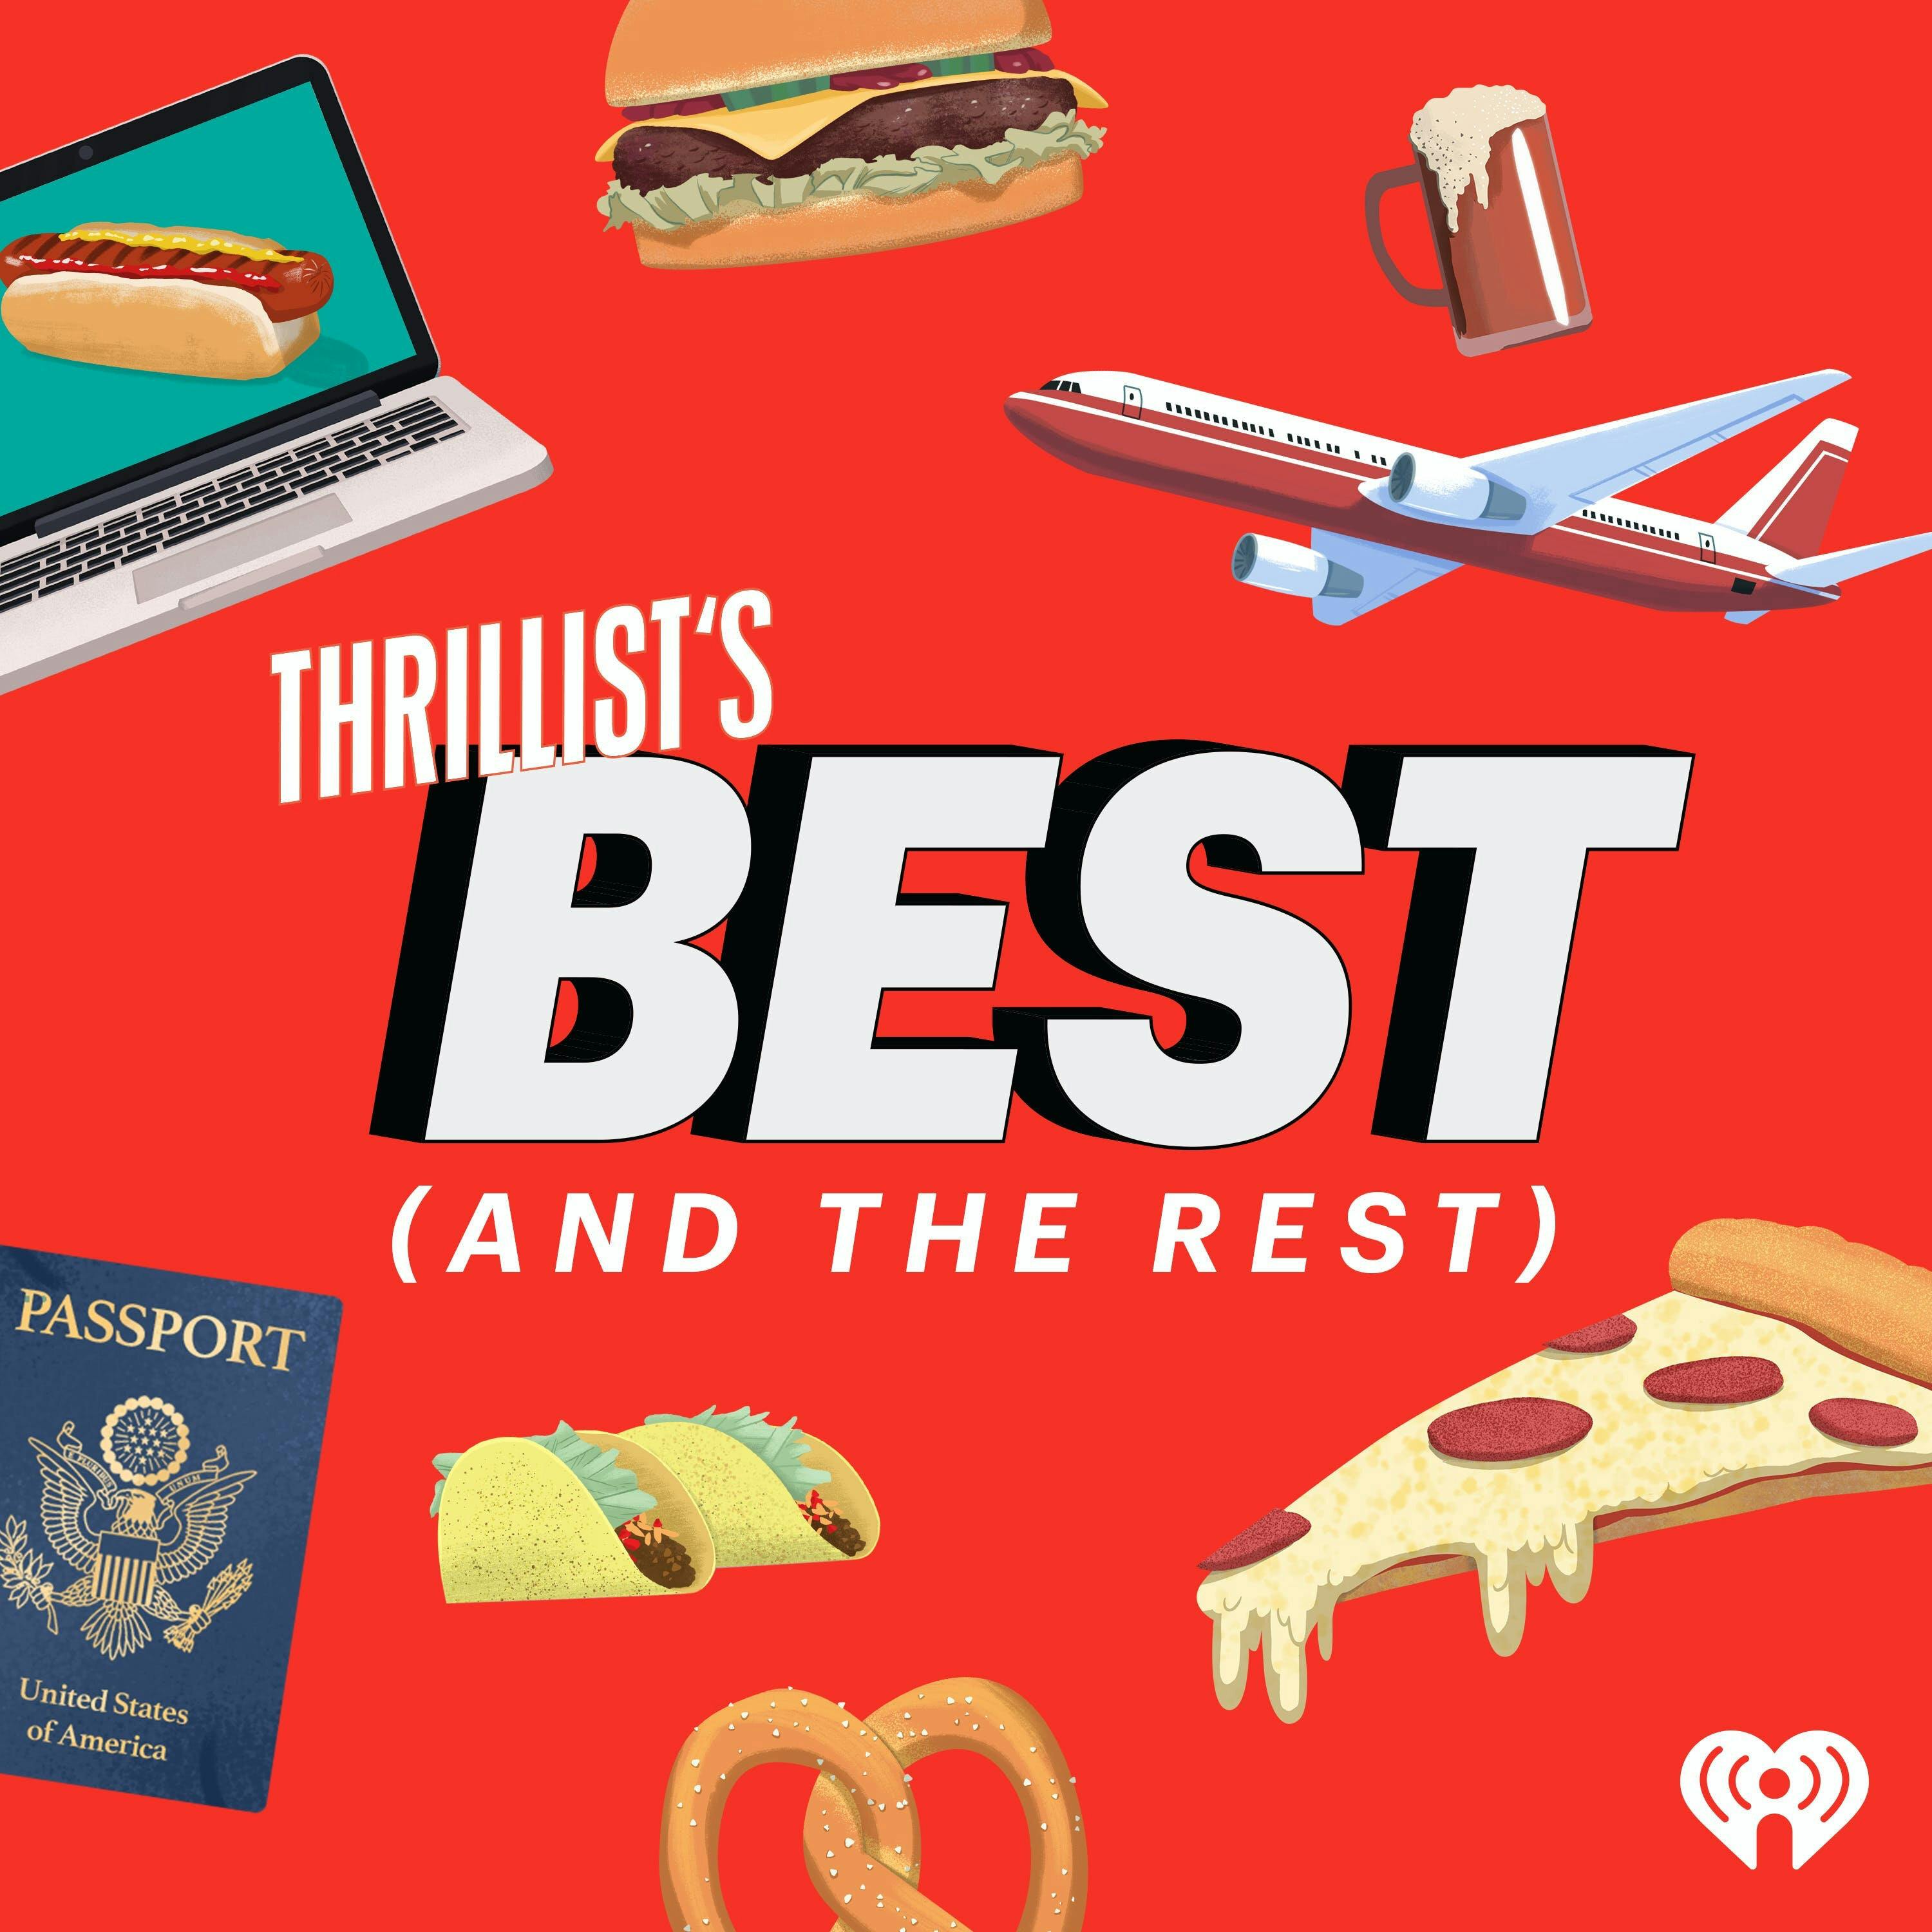 THRILLIST'S BEST: How to Travel Like an Expert (and the Mistakes You Don’t Want to Make)